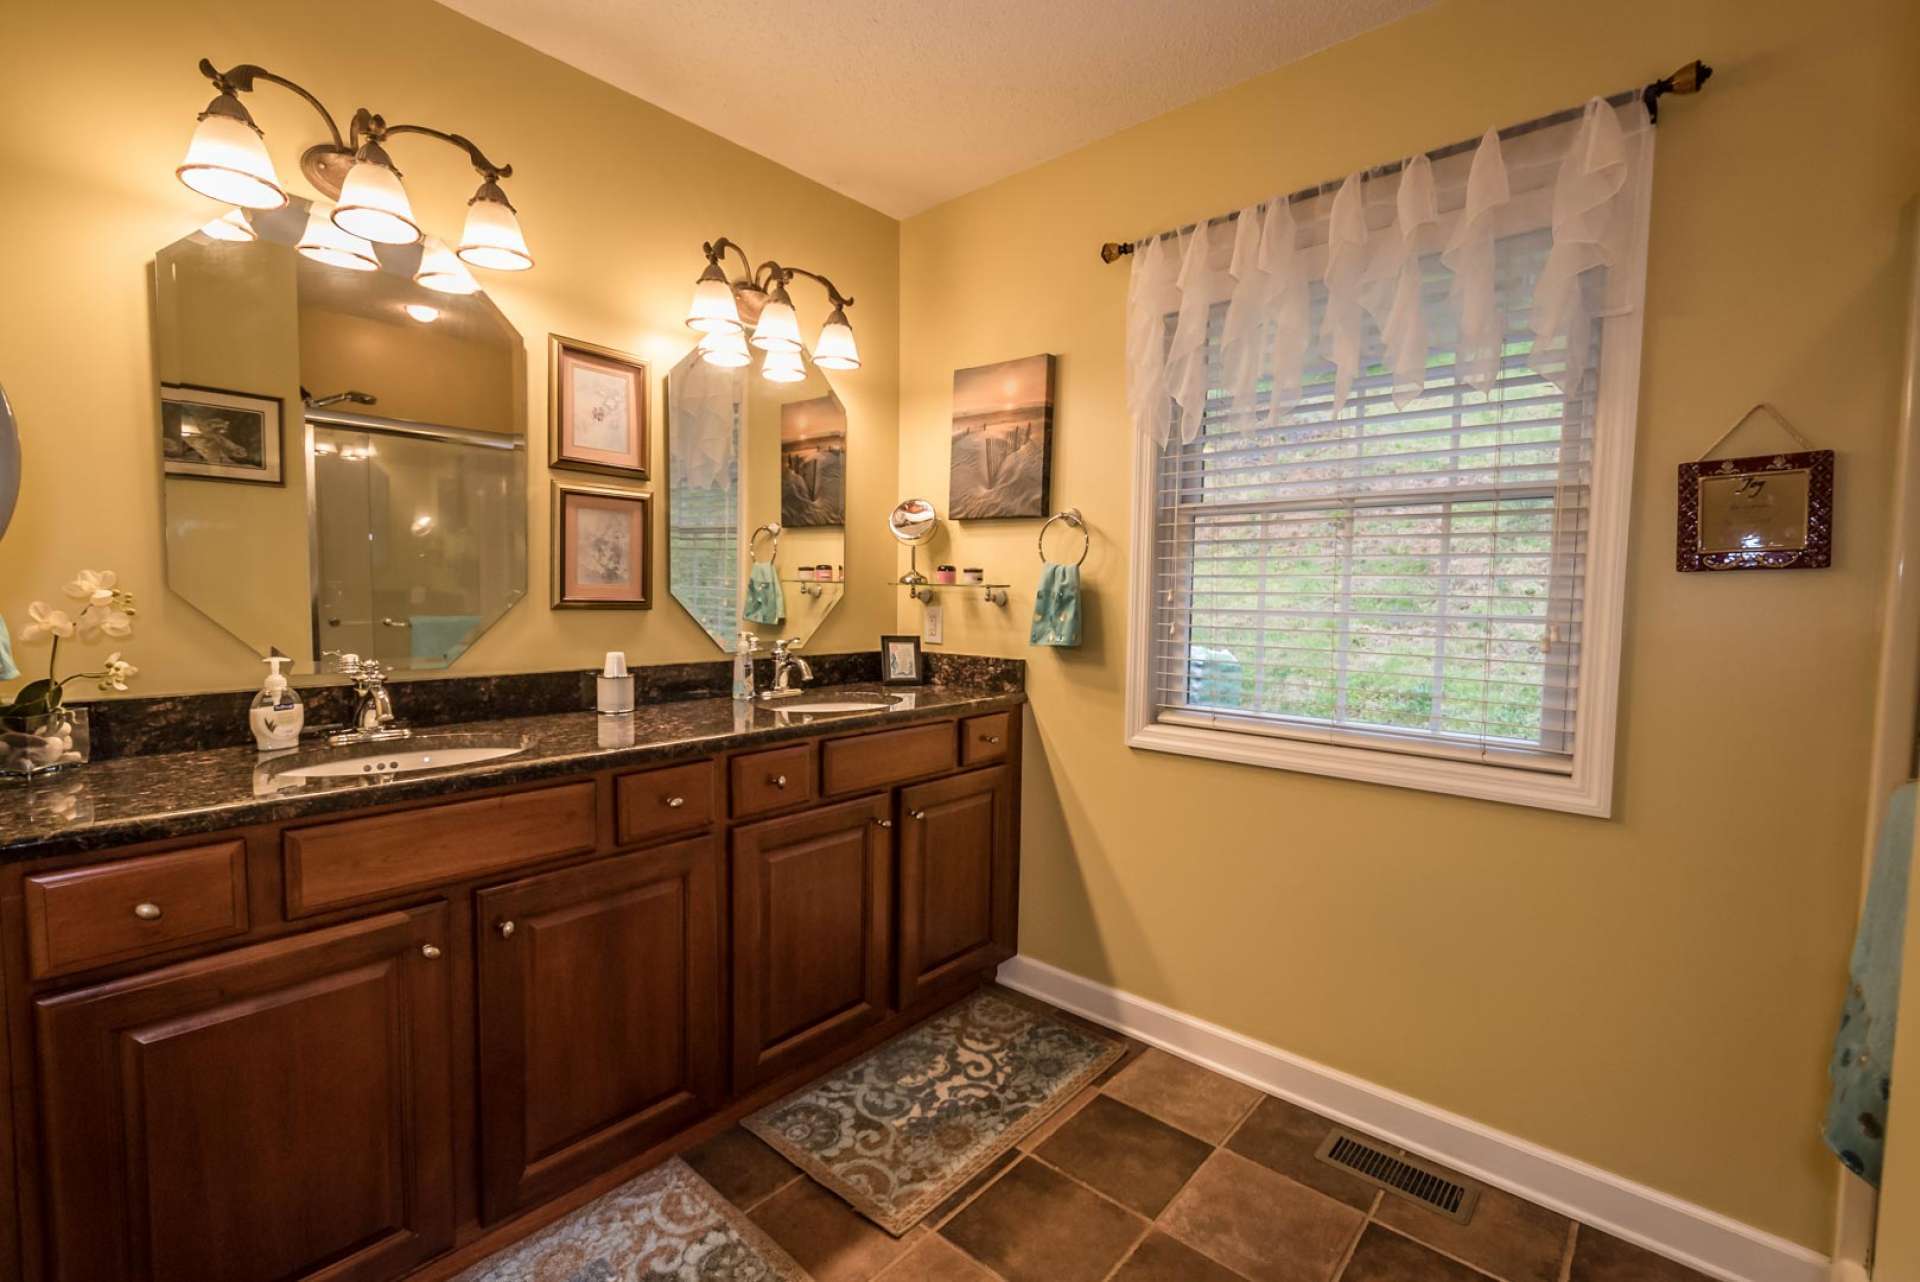 This spacious master bath offers tiled floor, double vanity with granite counter, and walk-in shower.